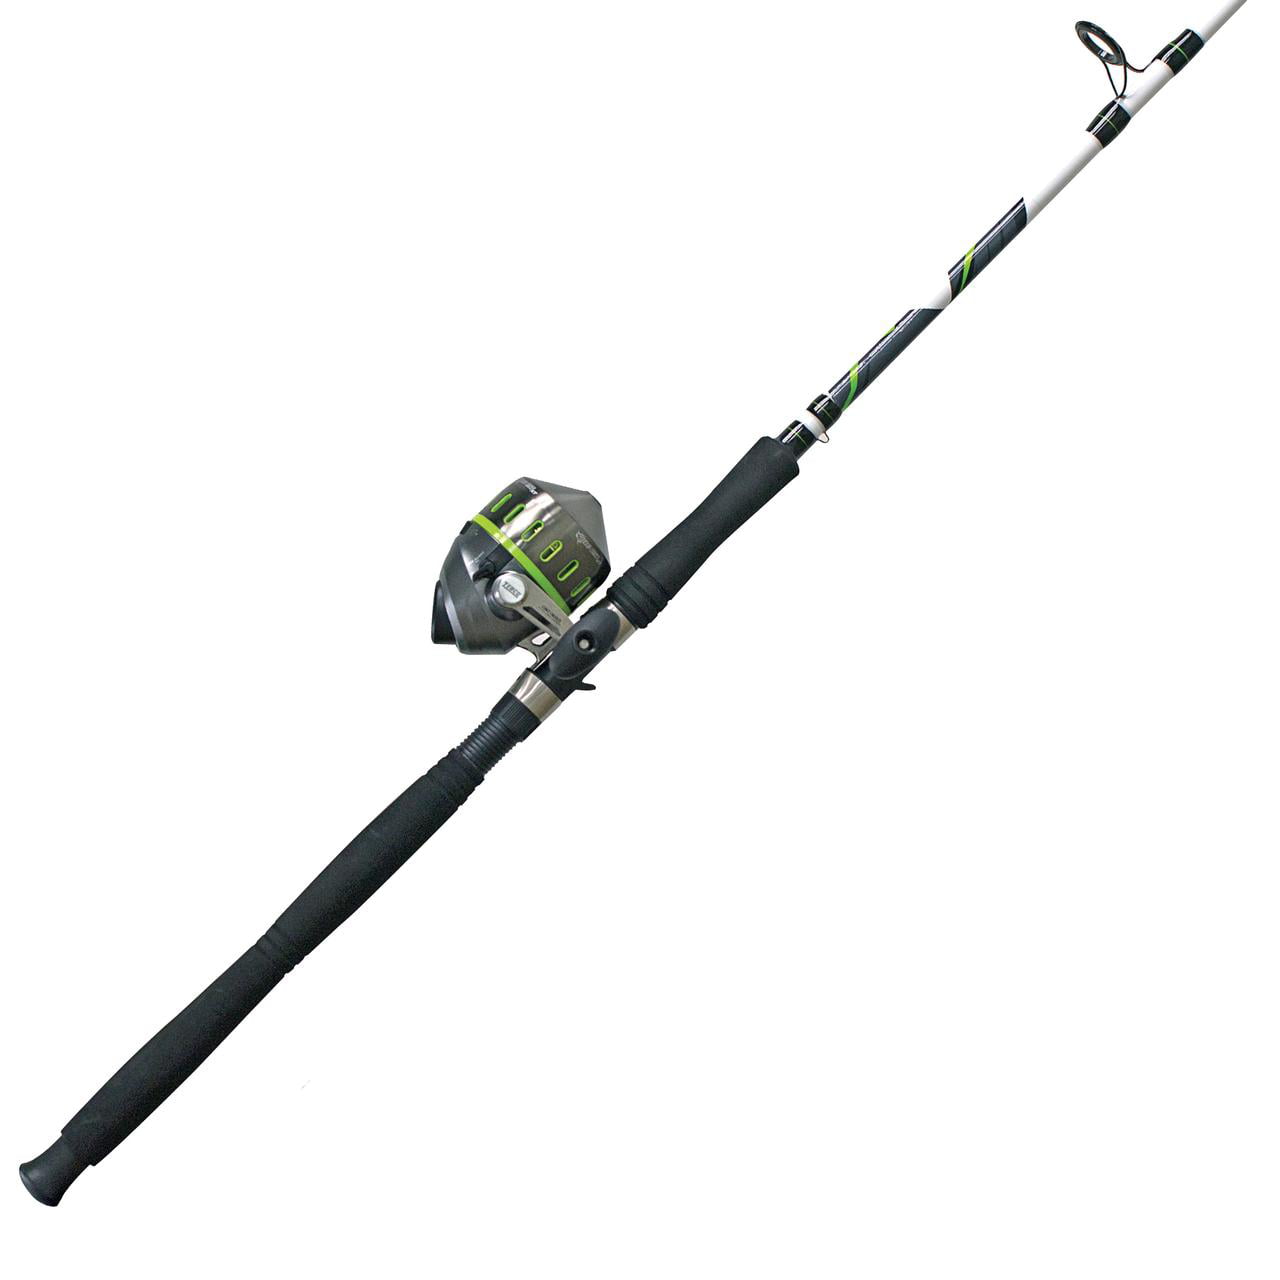 Zebco Big Cat XT Spincast Reel and Fishing Rod Combo, 7-foot 2-Piece  Multi-Layered E-Glass Fishing Pole with Extended EVA Handle, Size 80 Reel,  Instant Anti-Reverse Fishing Reel, Silver/Green 